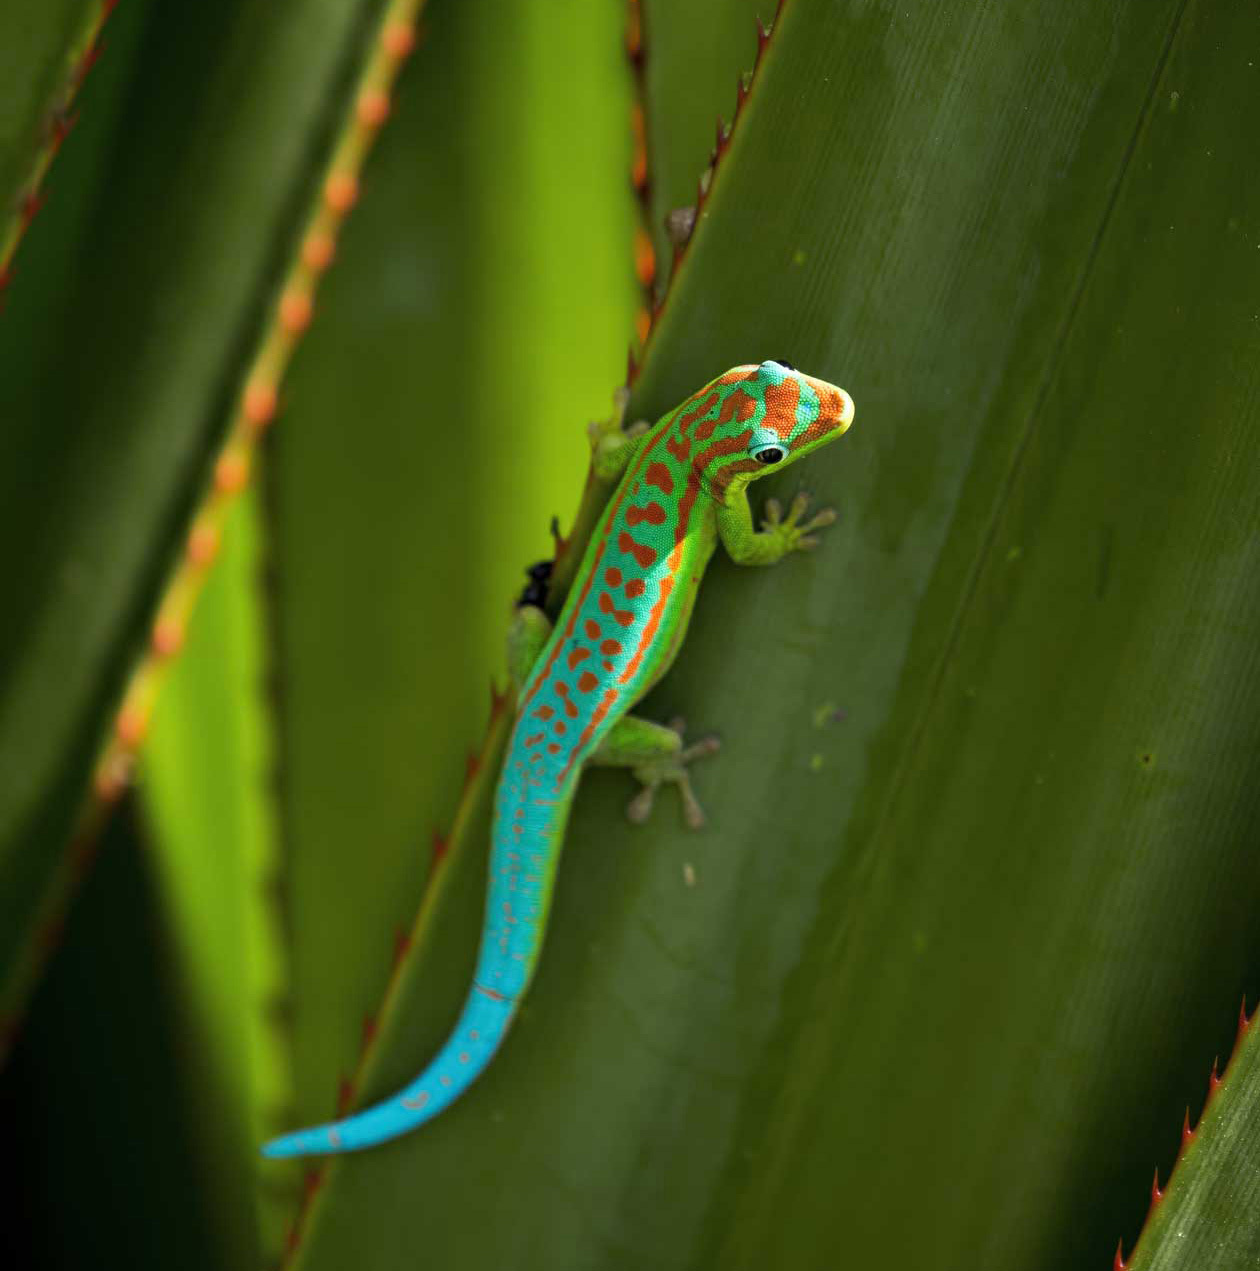 SCENERIES NATURE, ornate day gecko. Copyright © Mauritius Tourism Promotion Authority